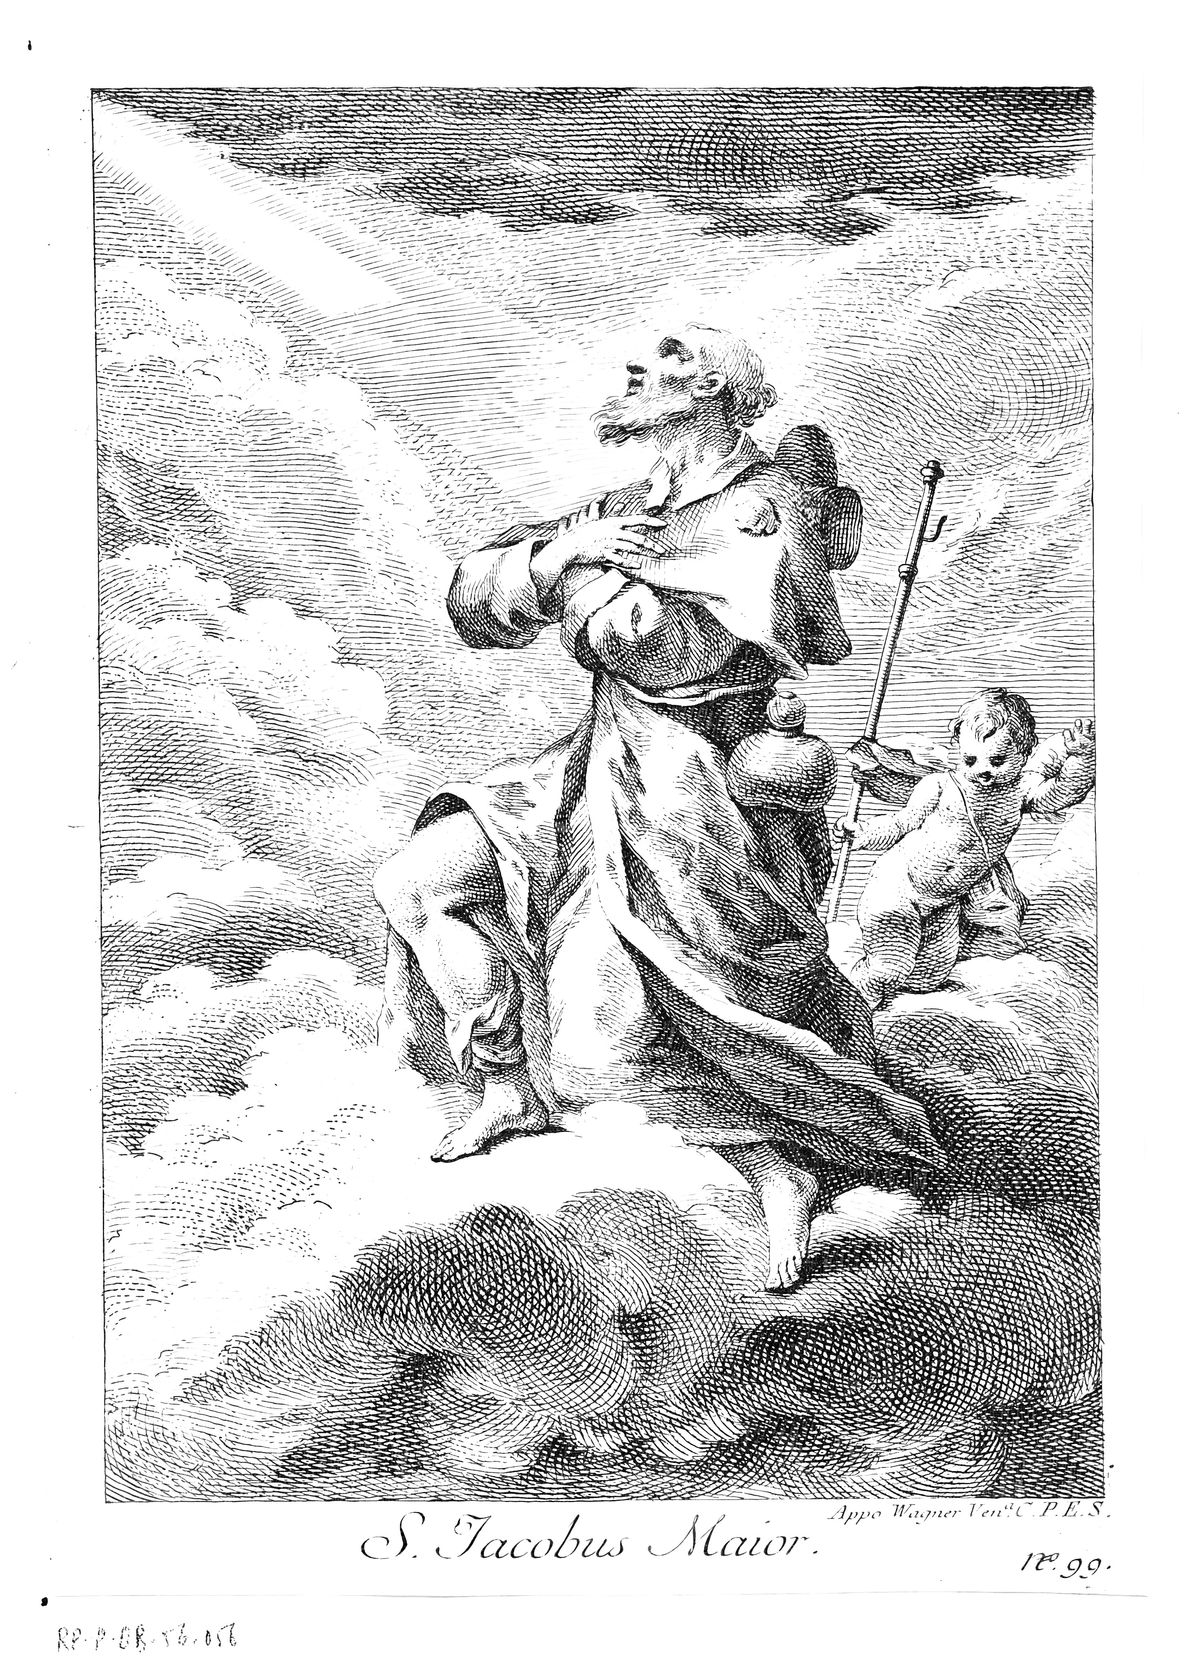 Saint James the Greater (1739-1780) by Joseph Wagner - Catholic Coloring Page